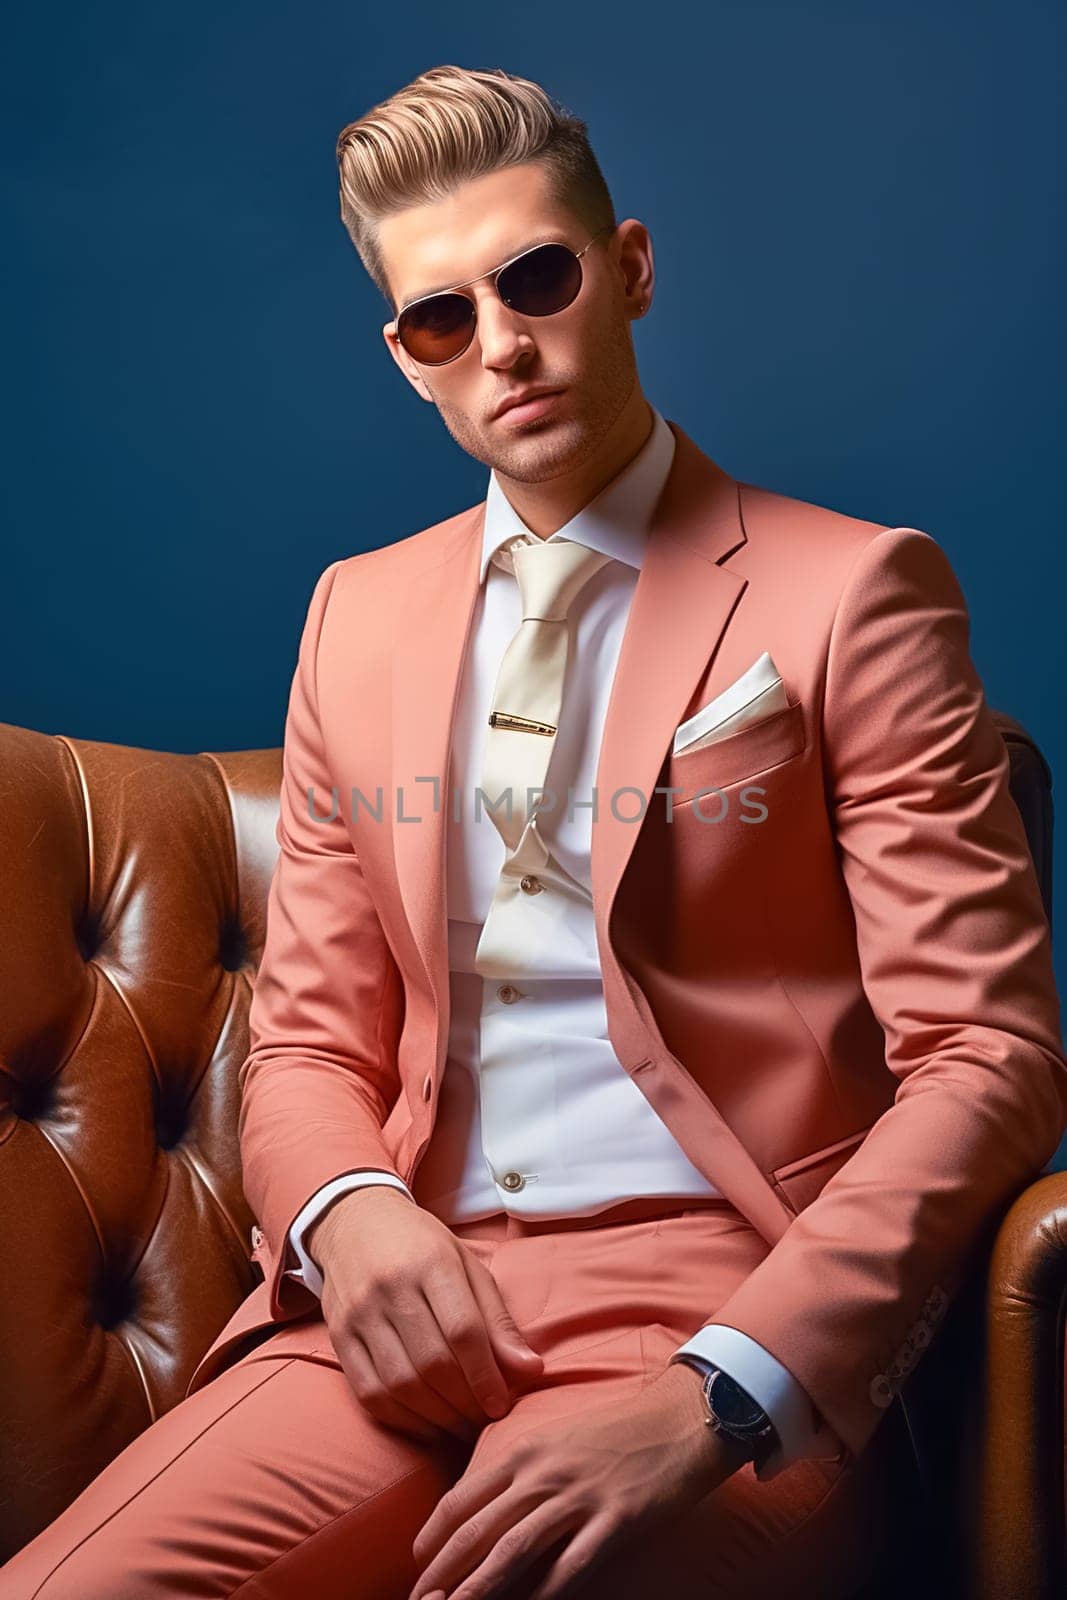 Stylish fashionable man wearing clothes from famous brands. High quality photo